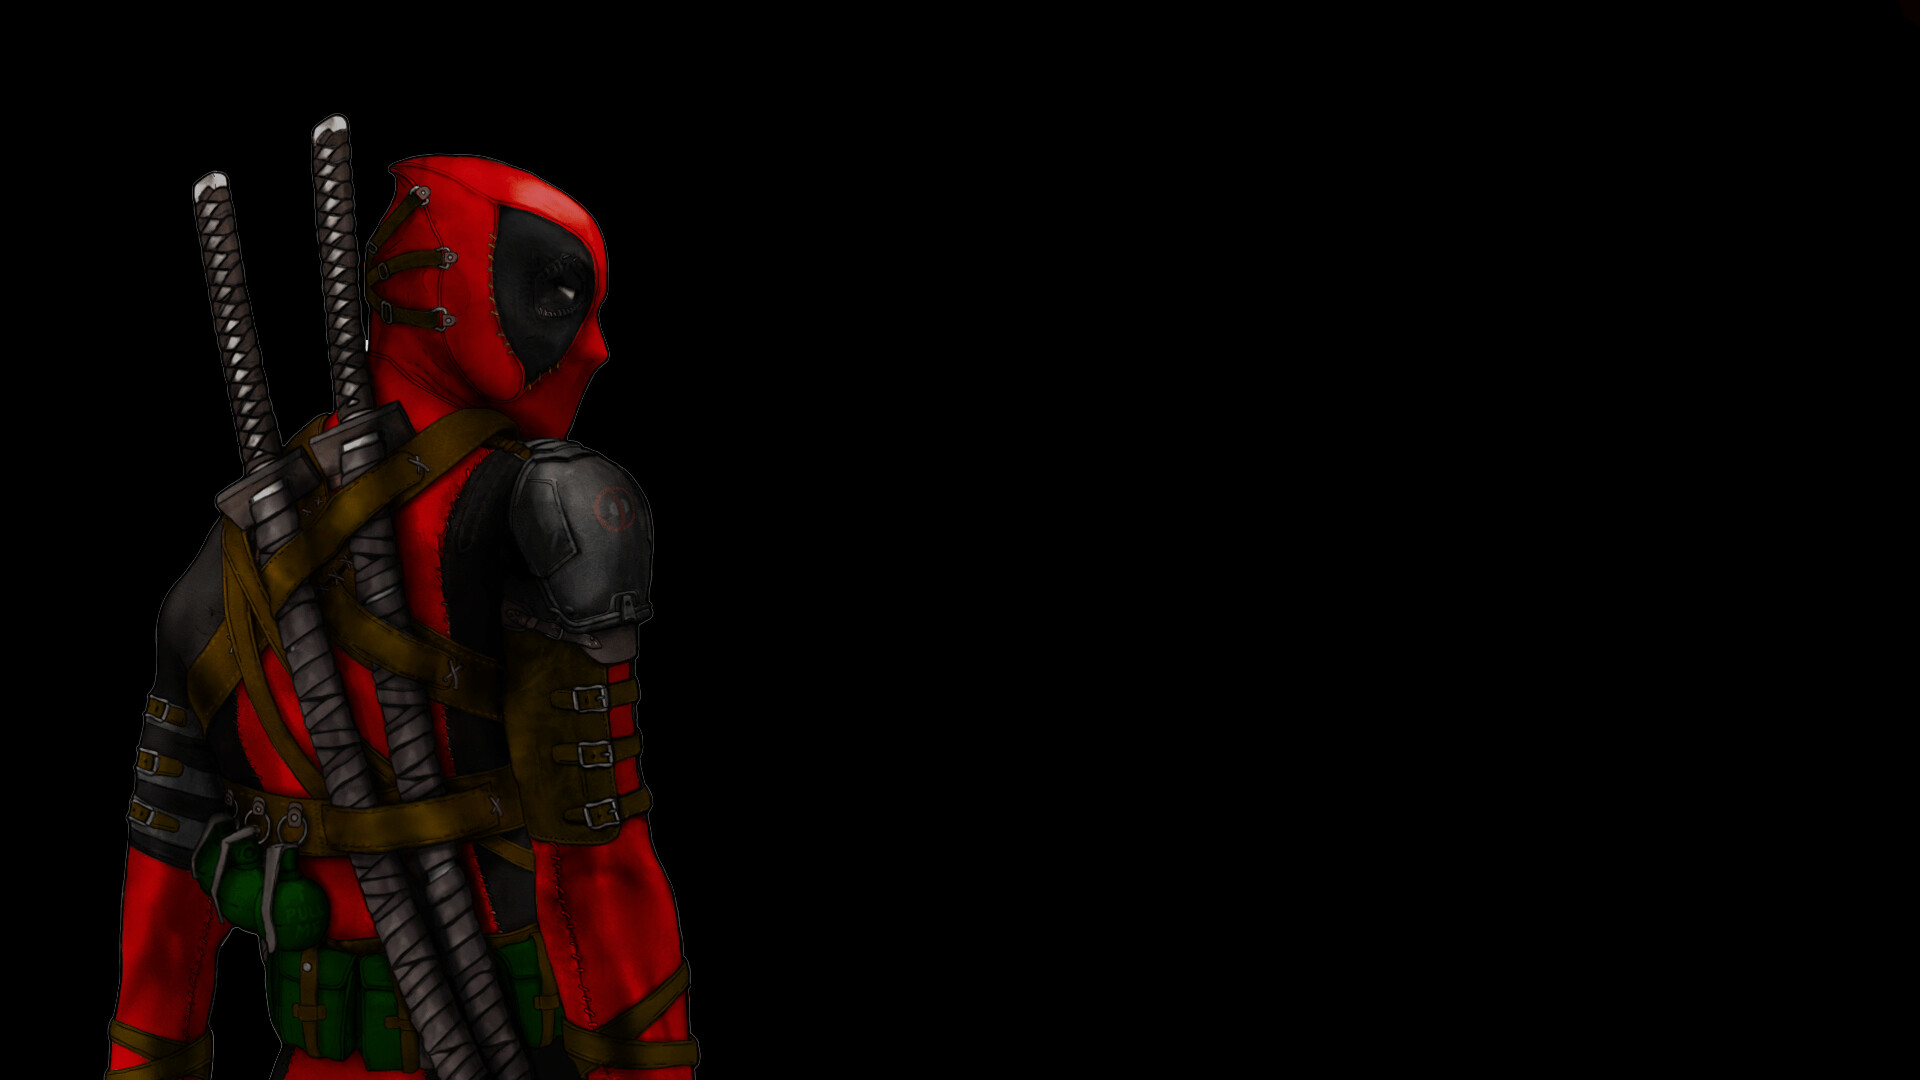 Deadpool: A highly trained assassin and mercenary with an accelerated healing factor. 1920x1080 Full HD Background.